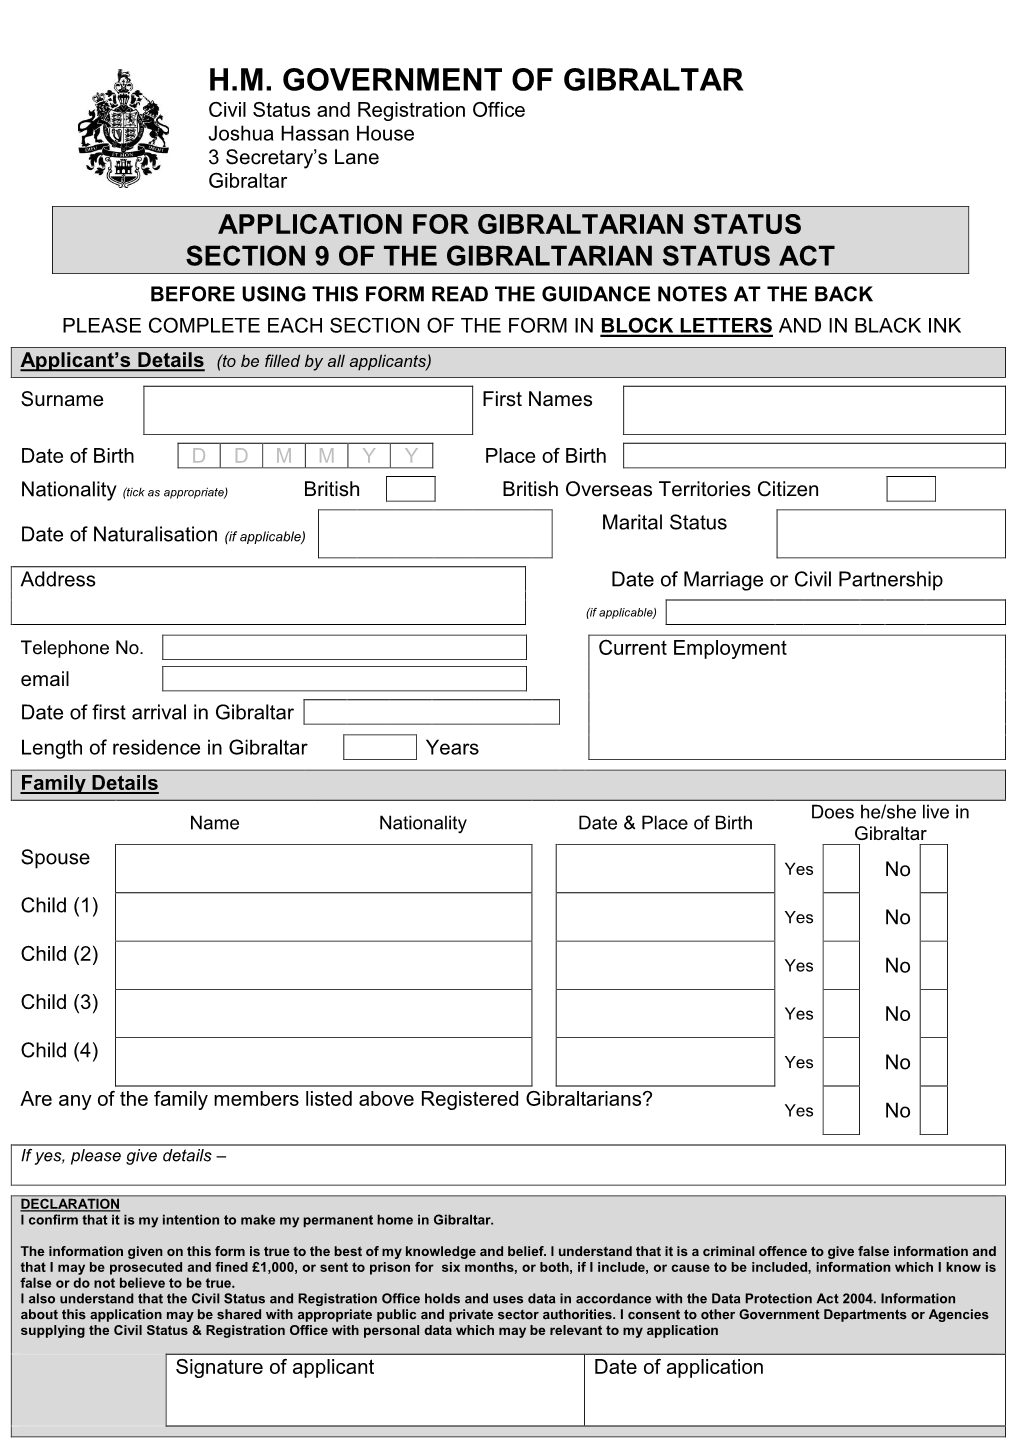 Application for Gibraltarian Status (Section 9)